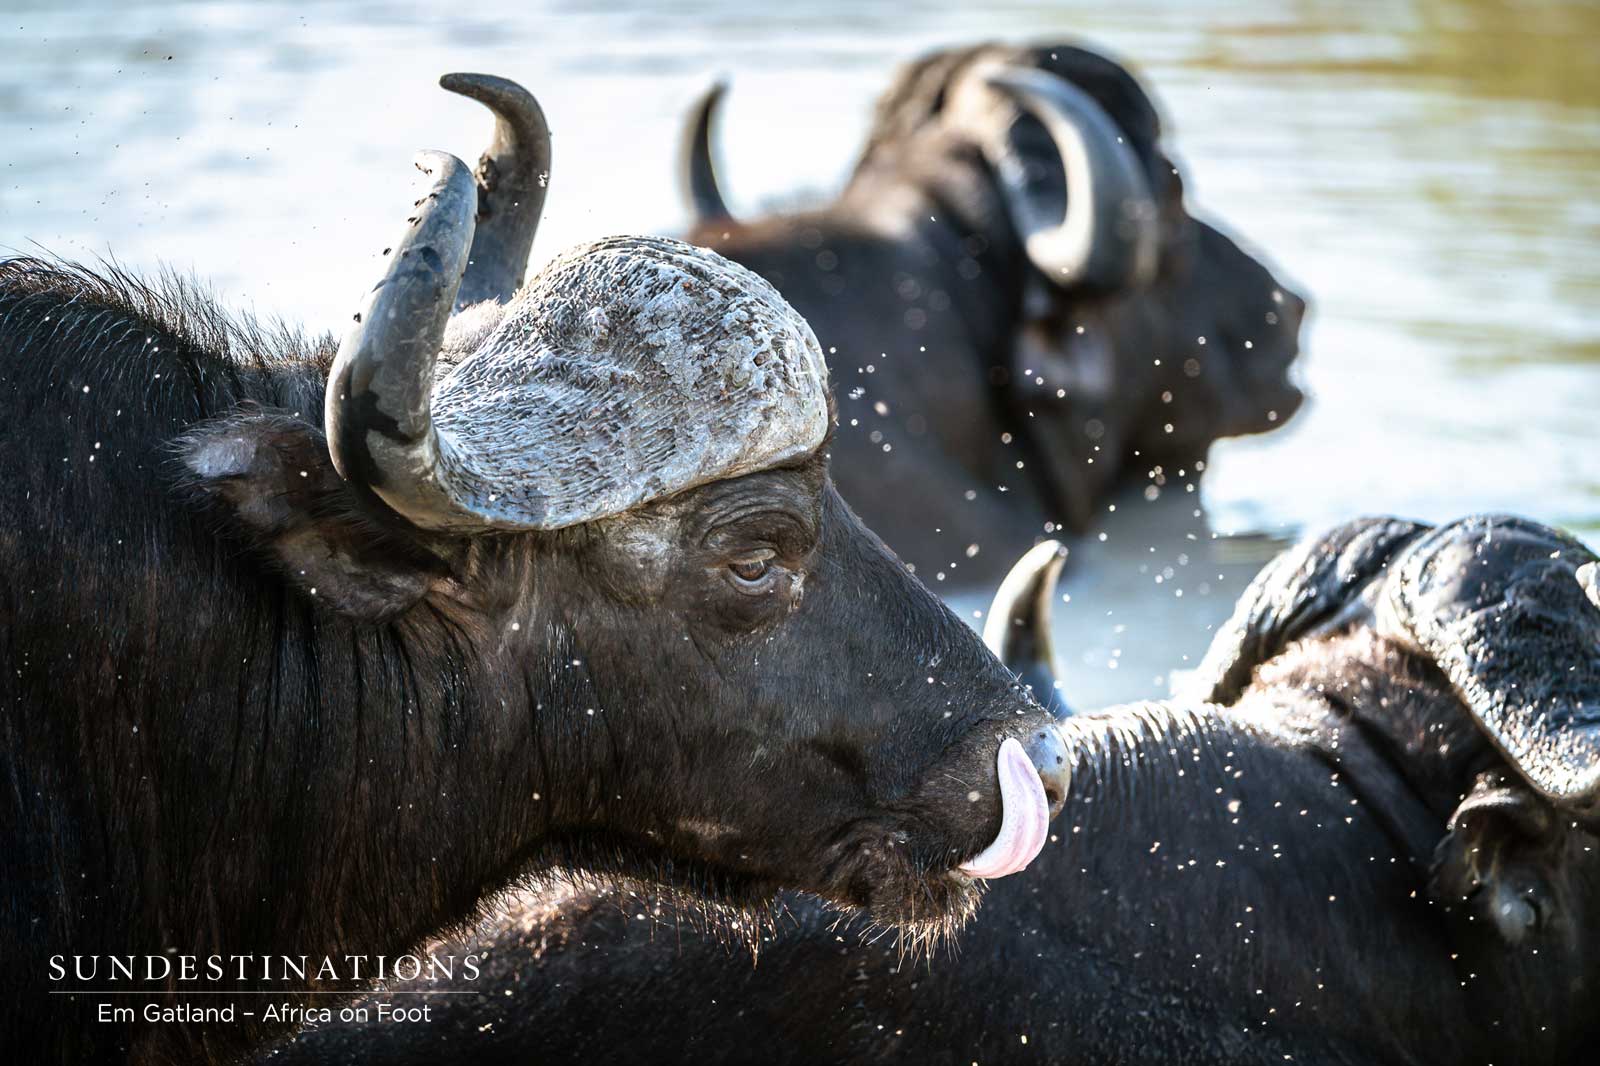 Buffalo at Africa on Foot